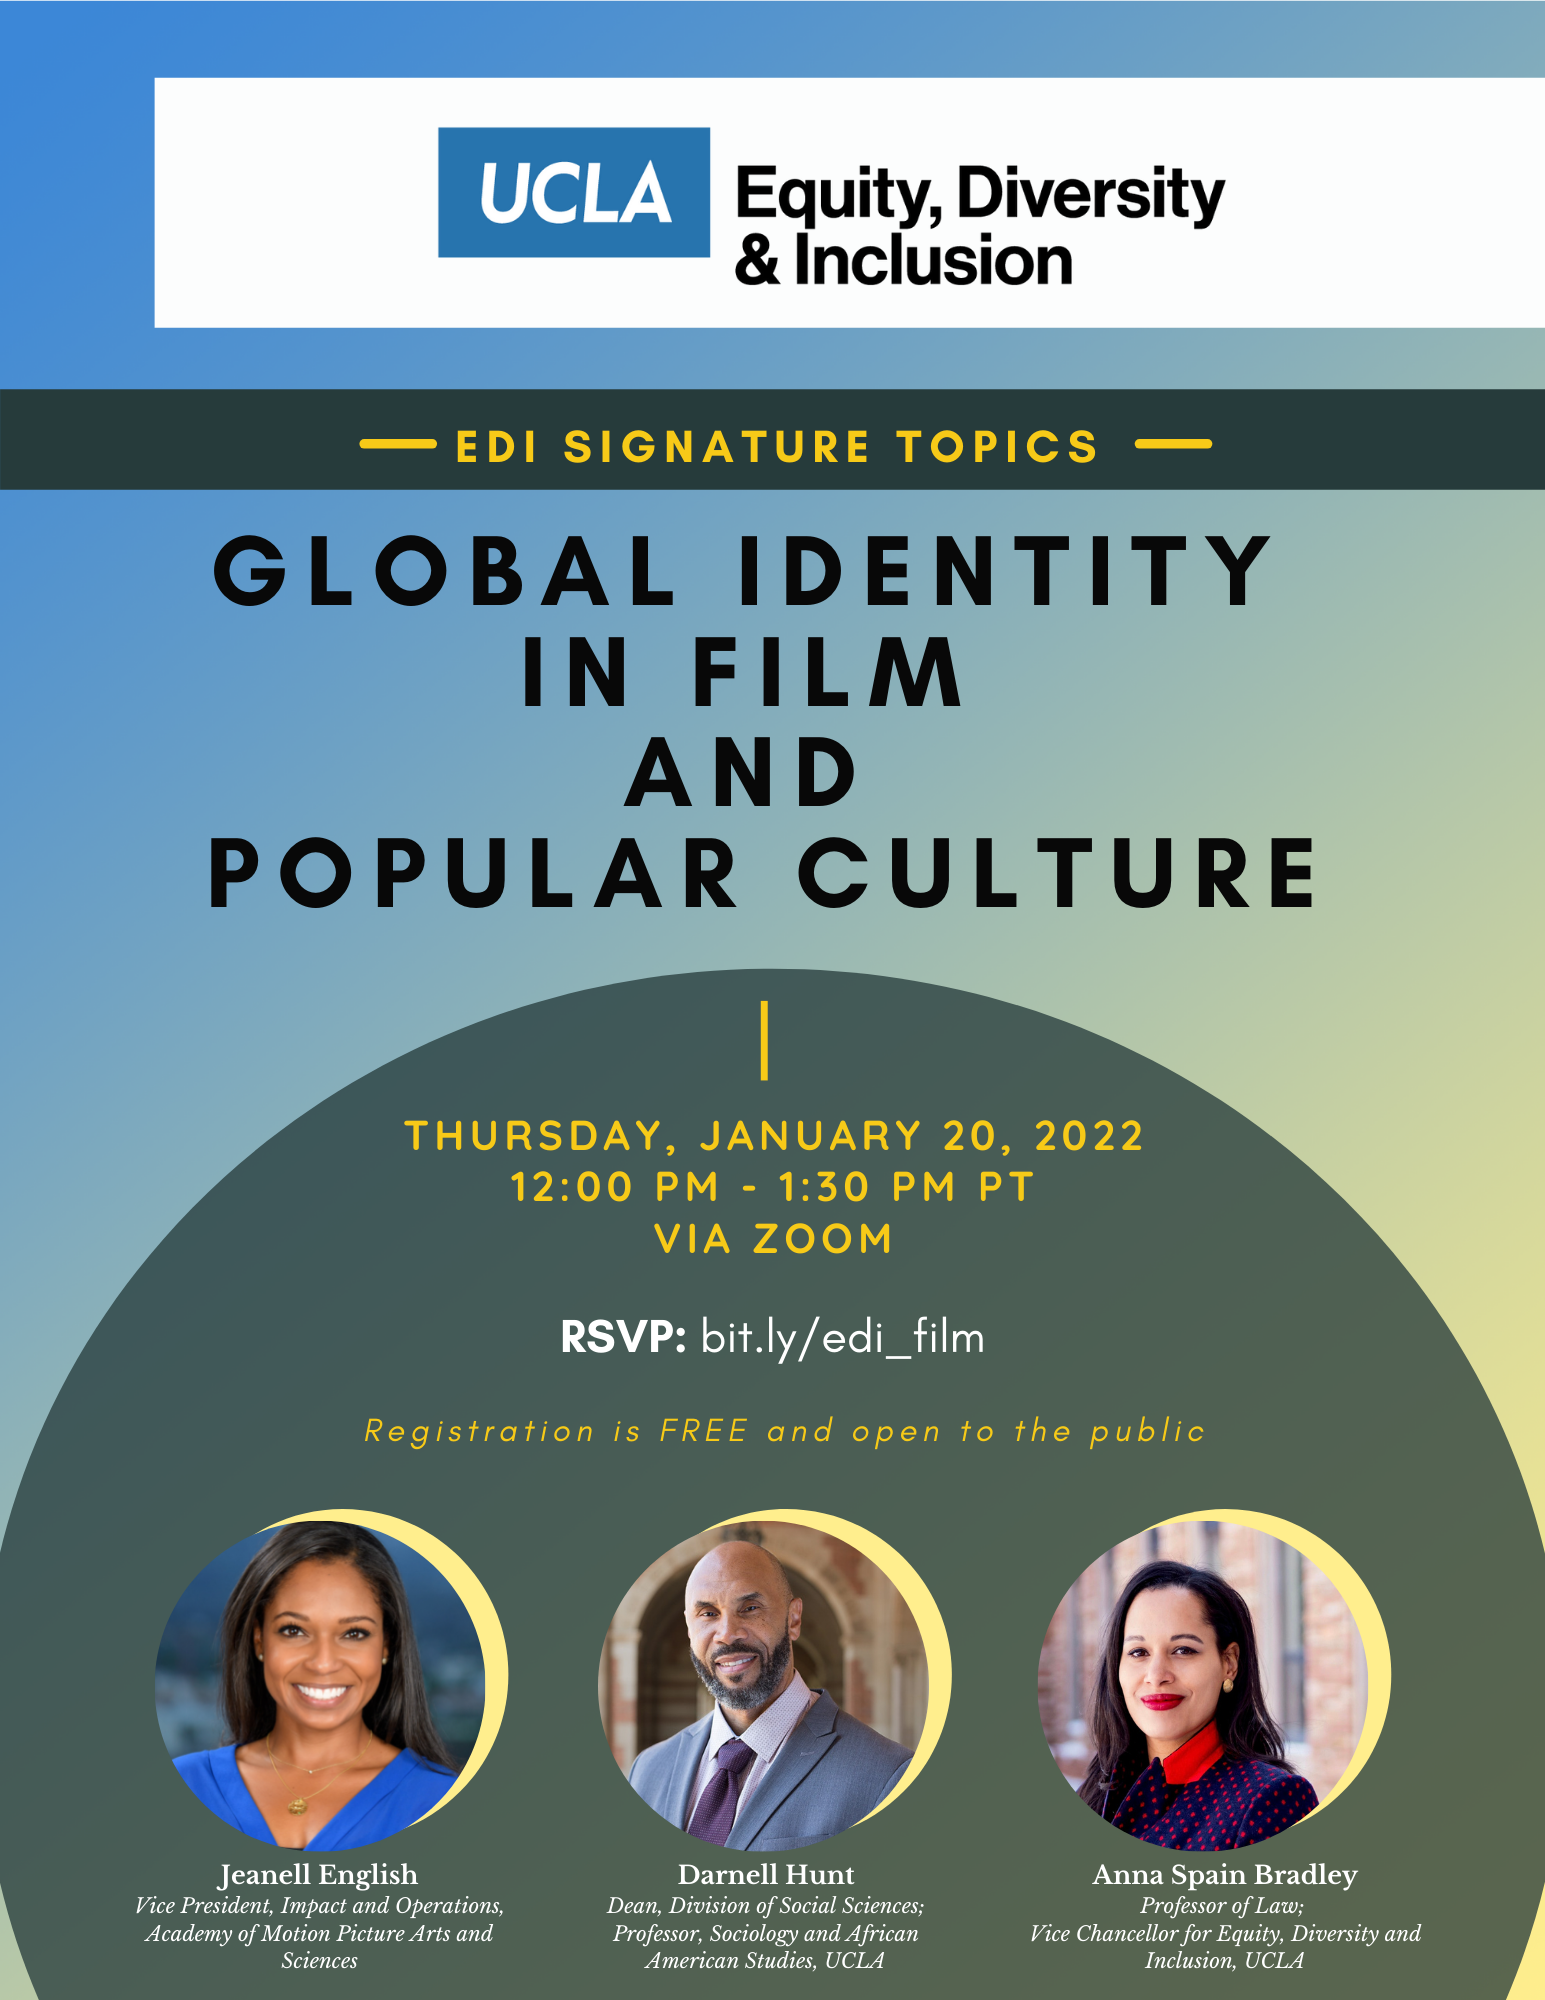 flyer for edi signature topics - Global Identity in Film and Popular Culture, taking place on thursday, january 20, 2022 at 12 pm